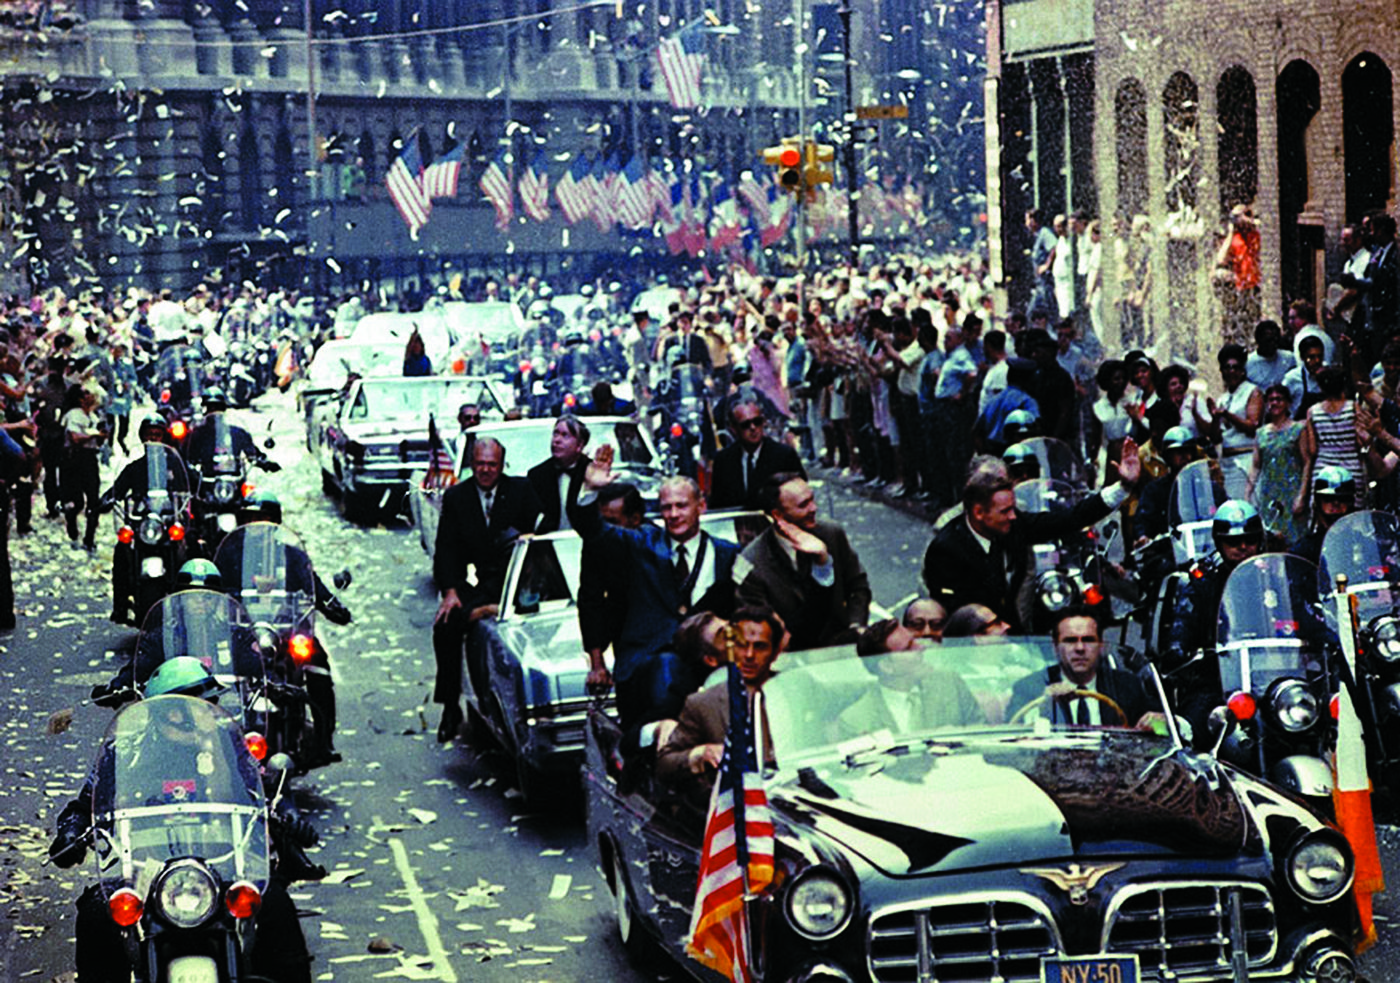 The famous ticker tape parade held in New York City for the Apollo 11 crew.